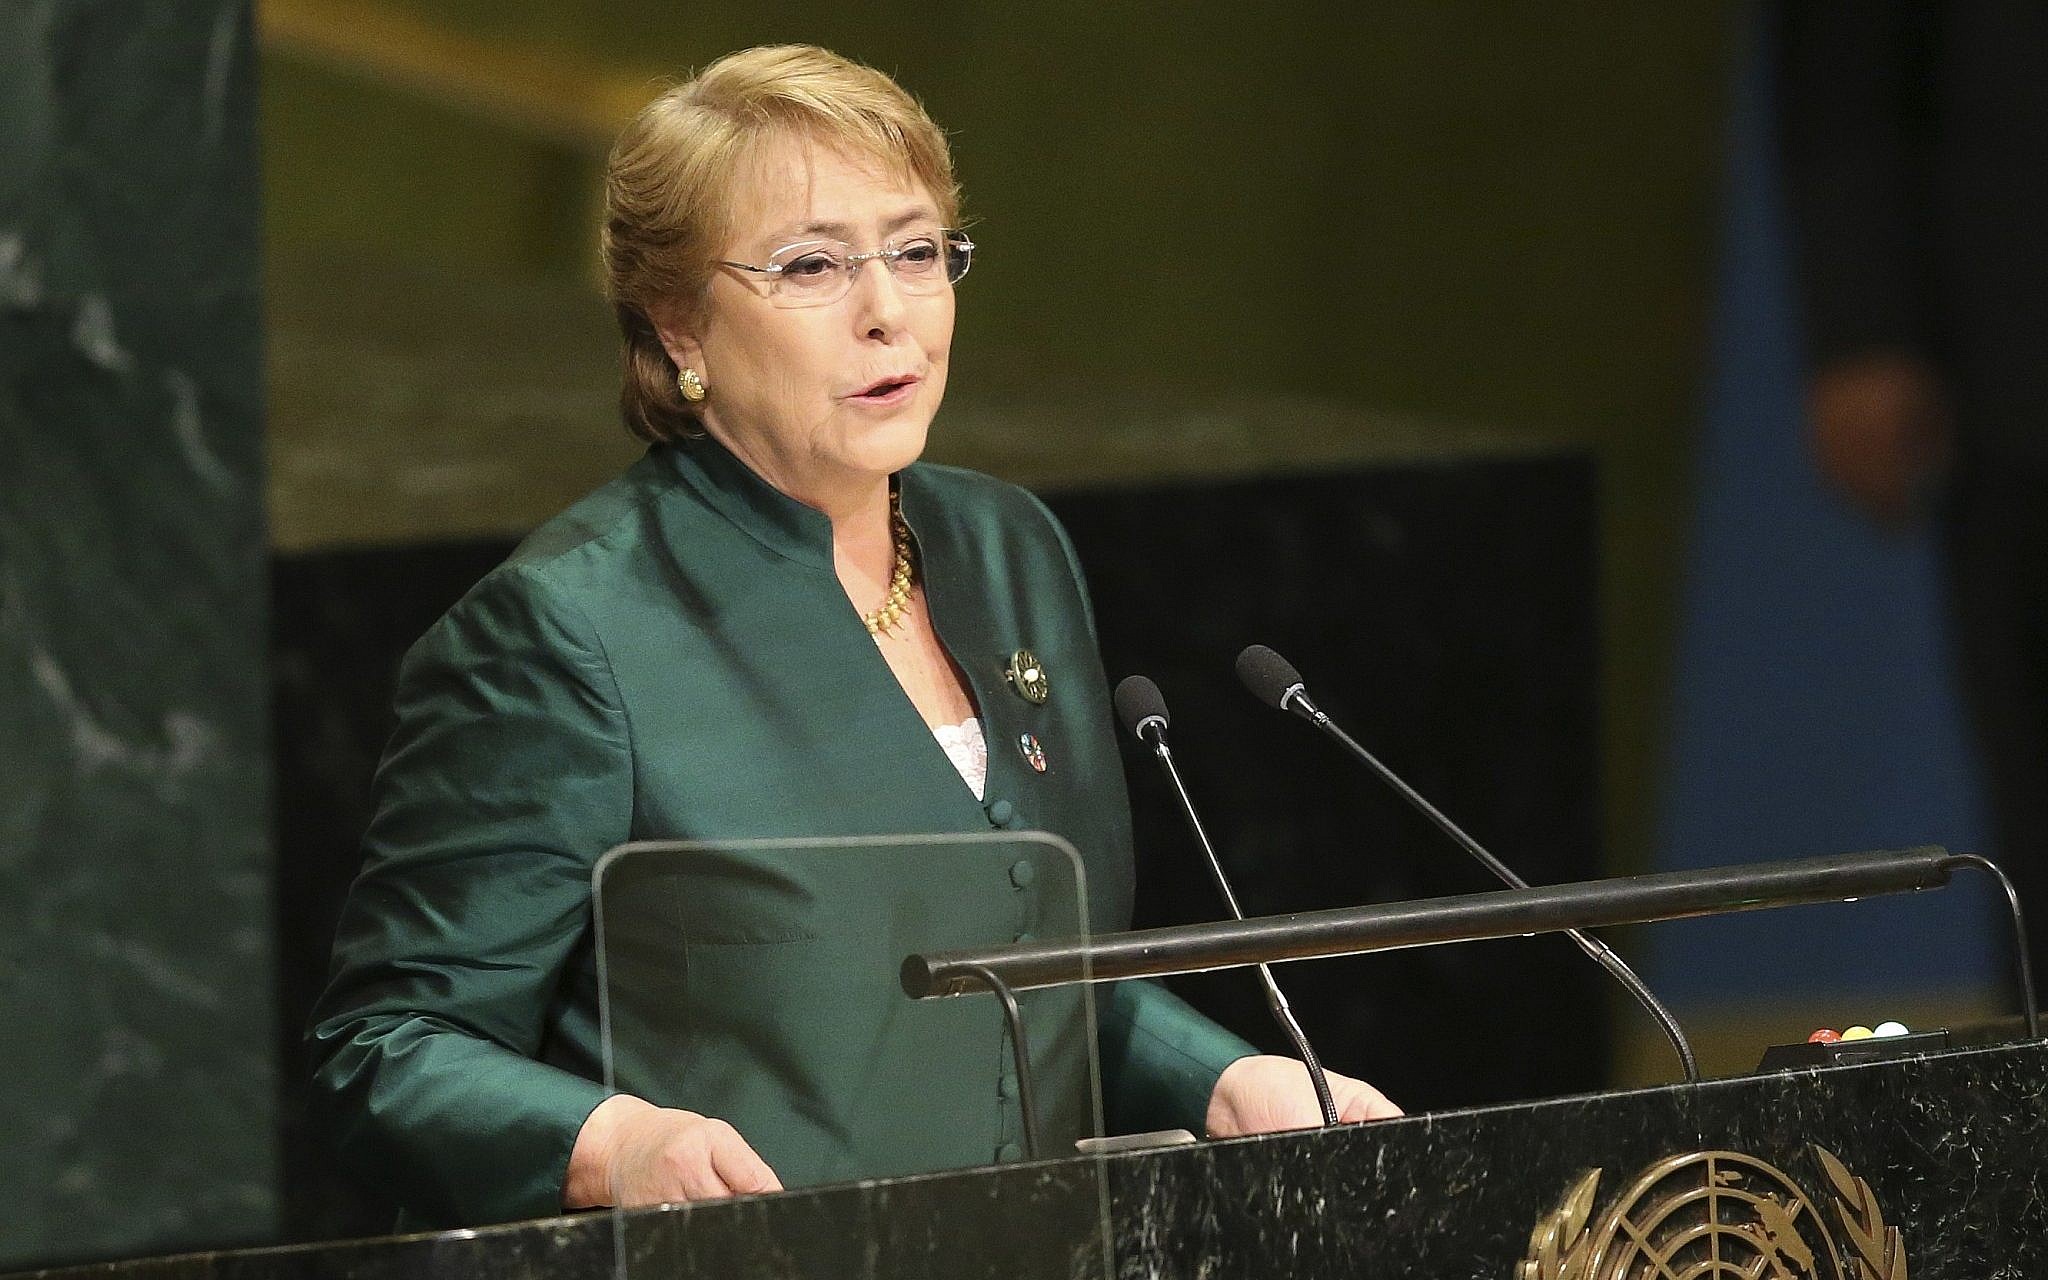 In March 2021, United Nations High Commissioner for Human Rights, Michelle Bachelet, said that the allegations against the human rights abuses orchestrated by the RAB have been a “long-standing concern.”